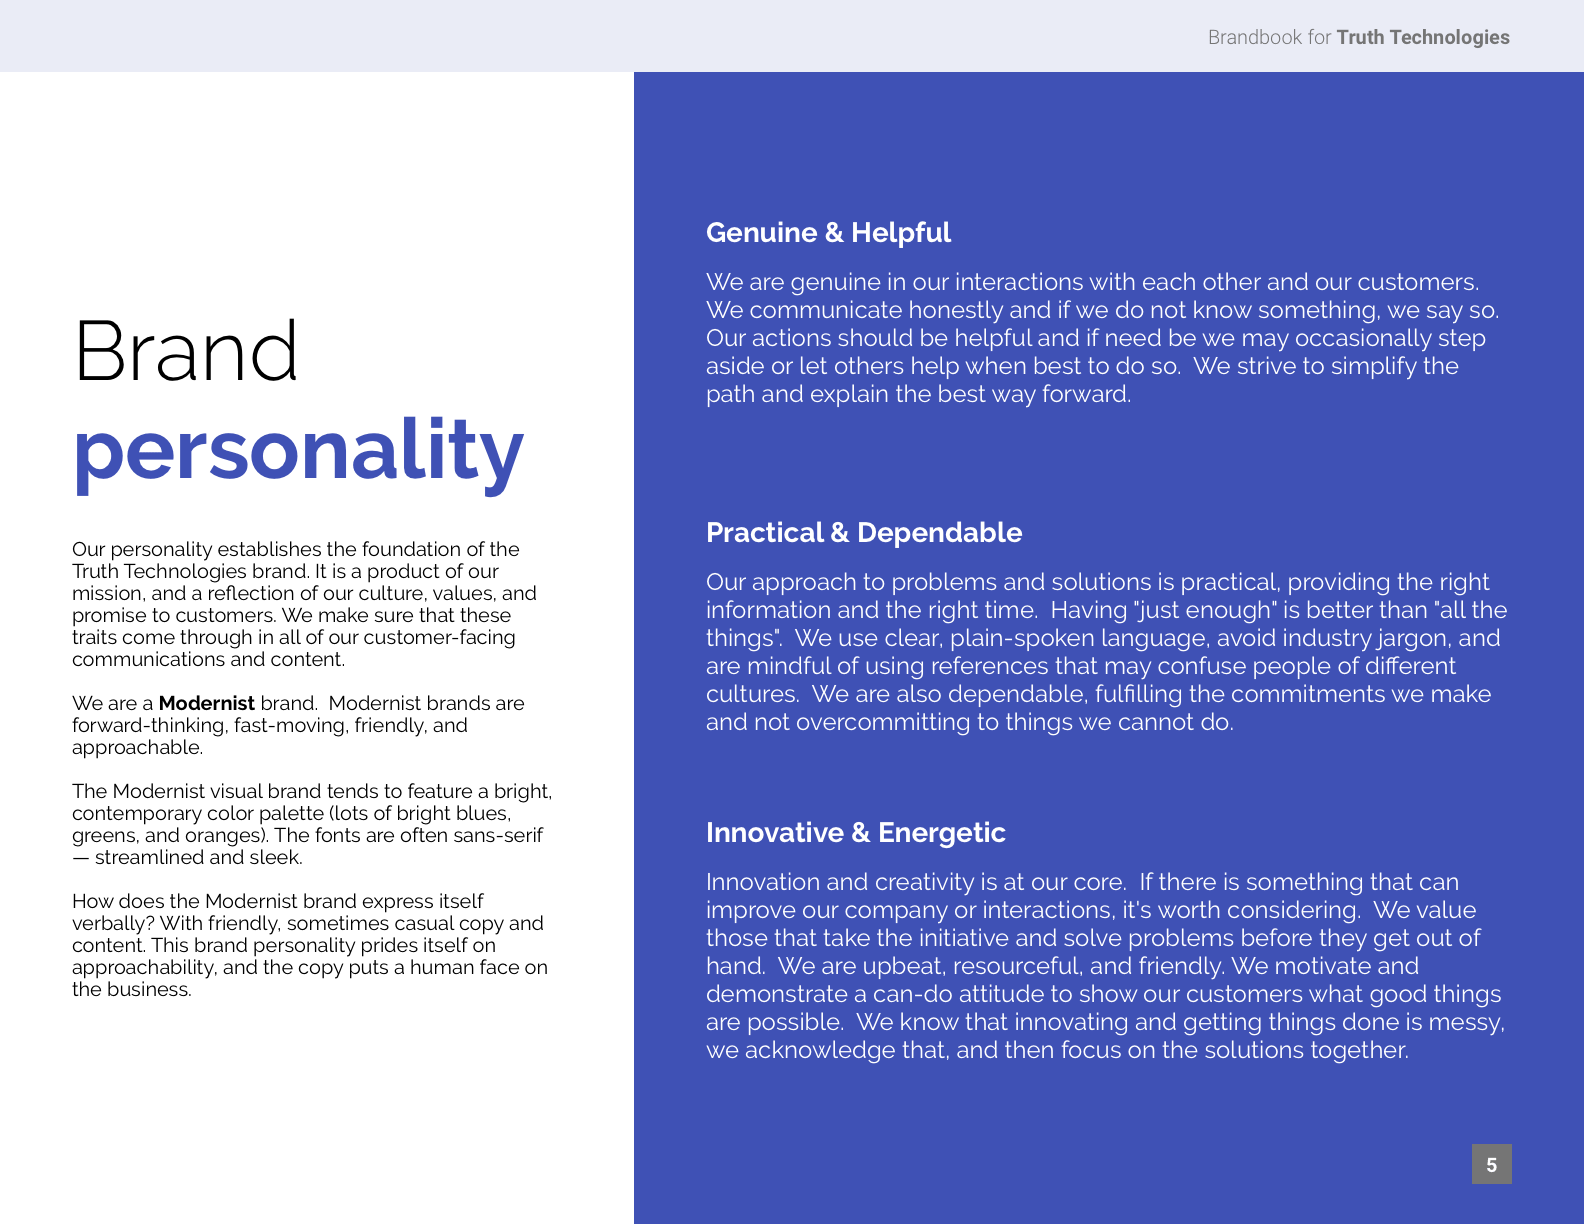 rebrand-02-brand-guide-02-personality.png